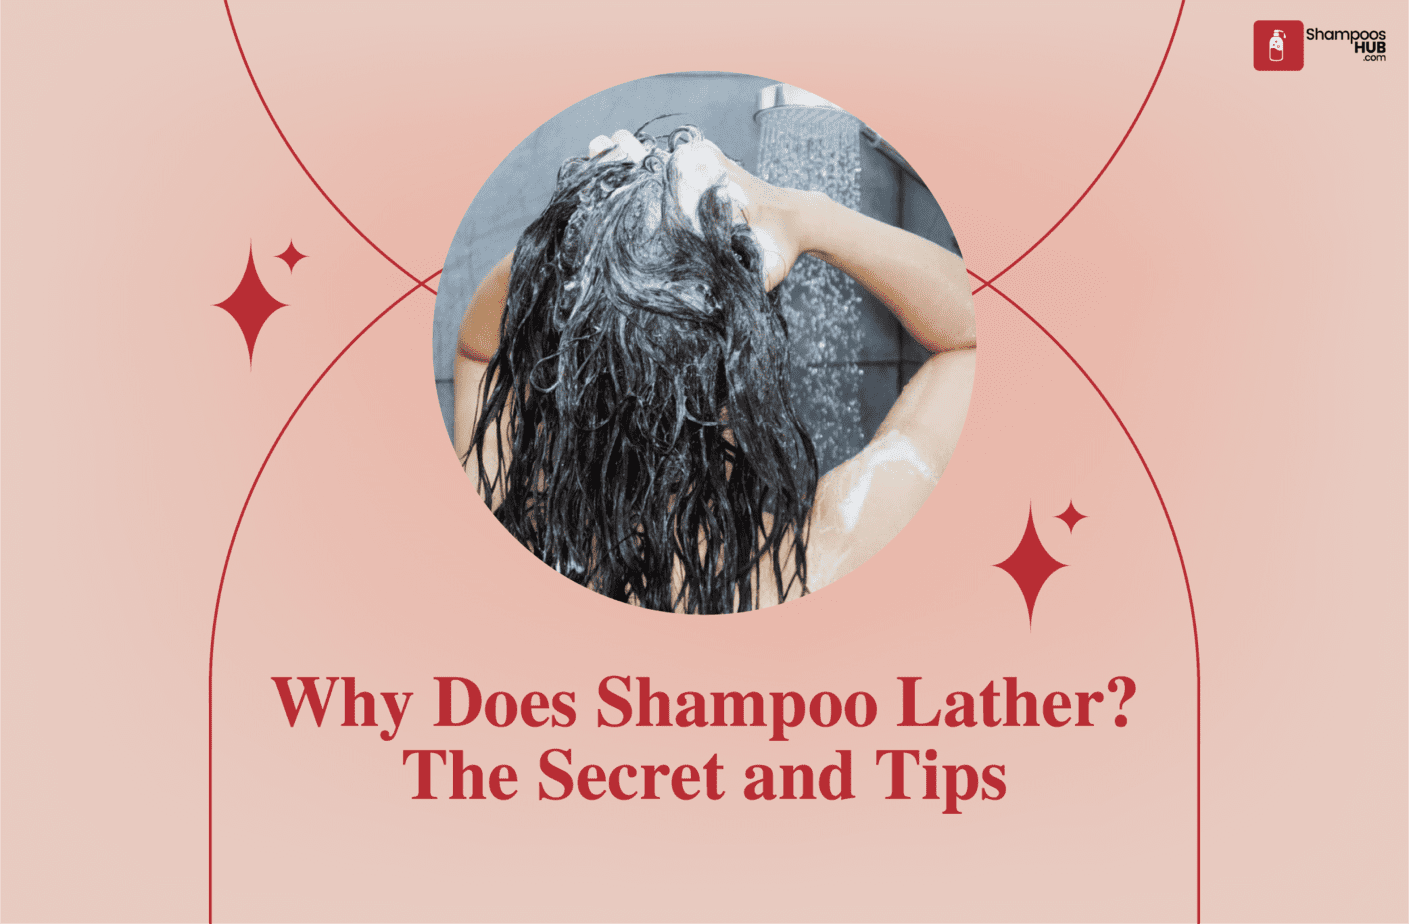 Why Does Shampoo Lather?